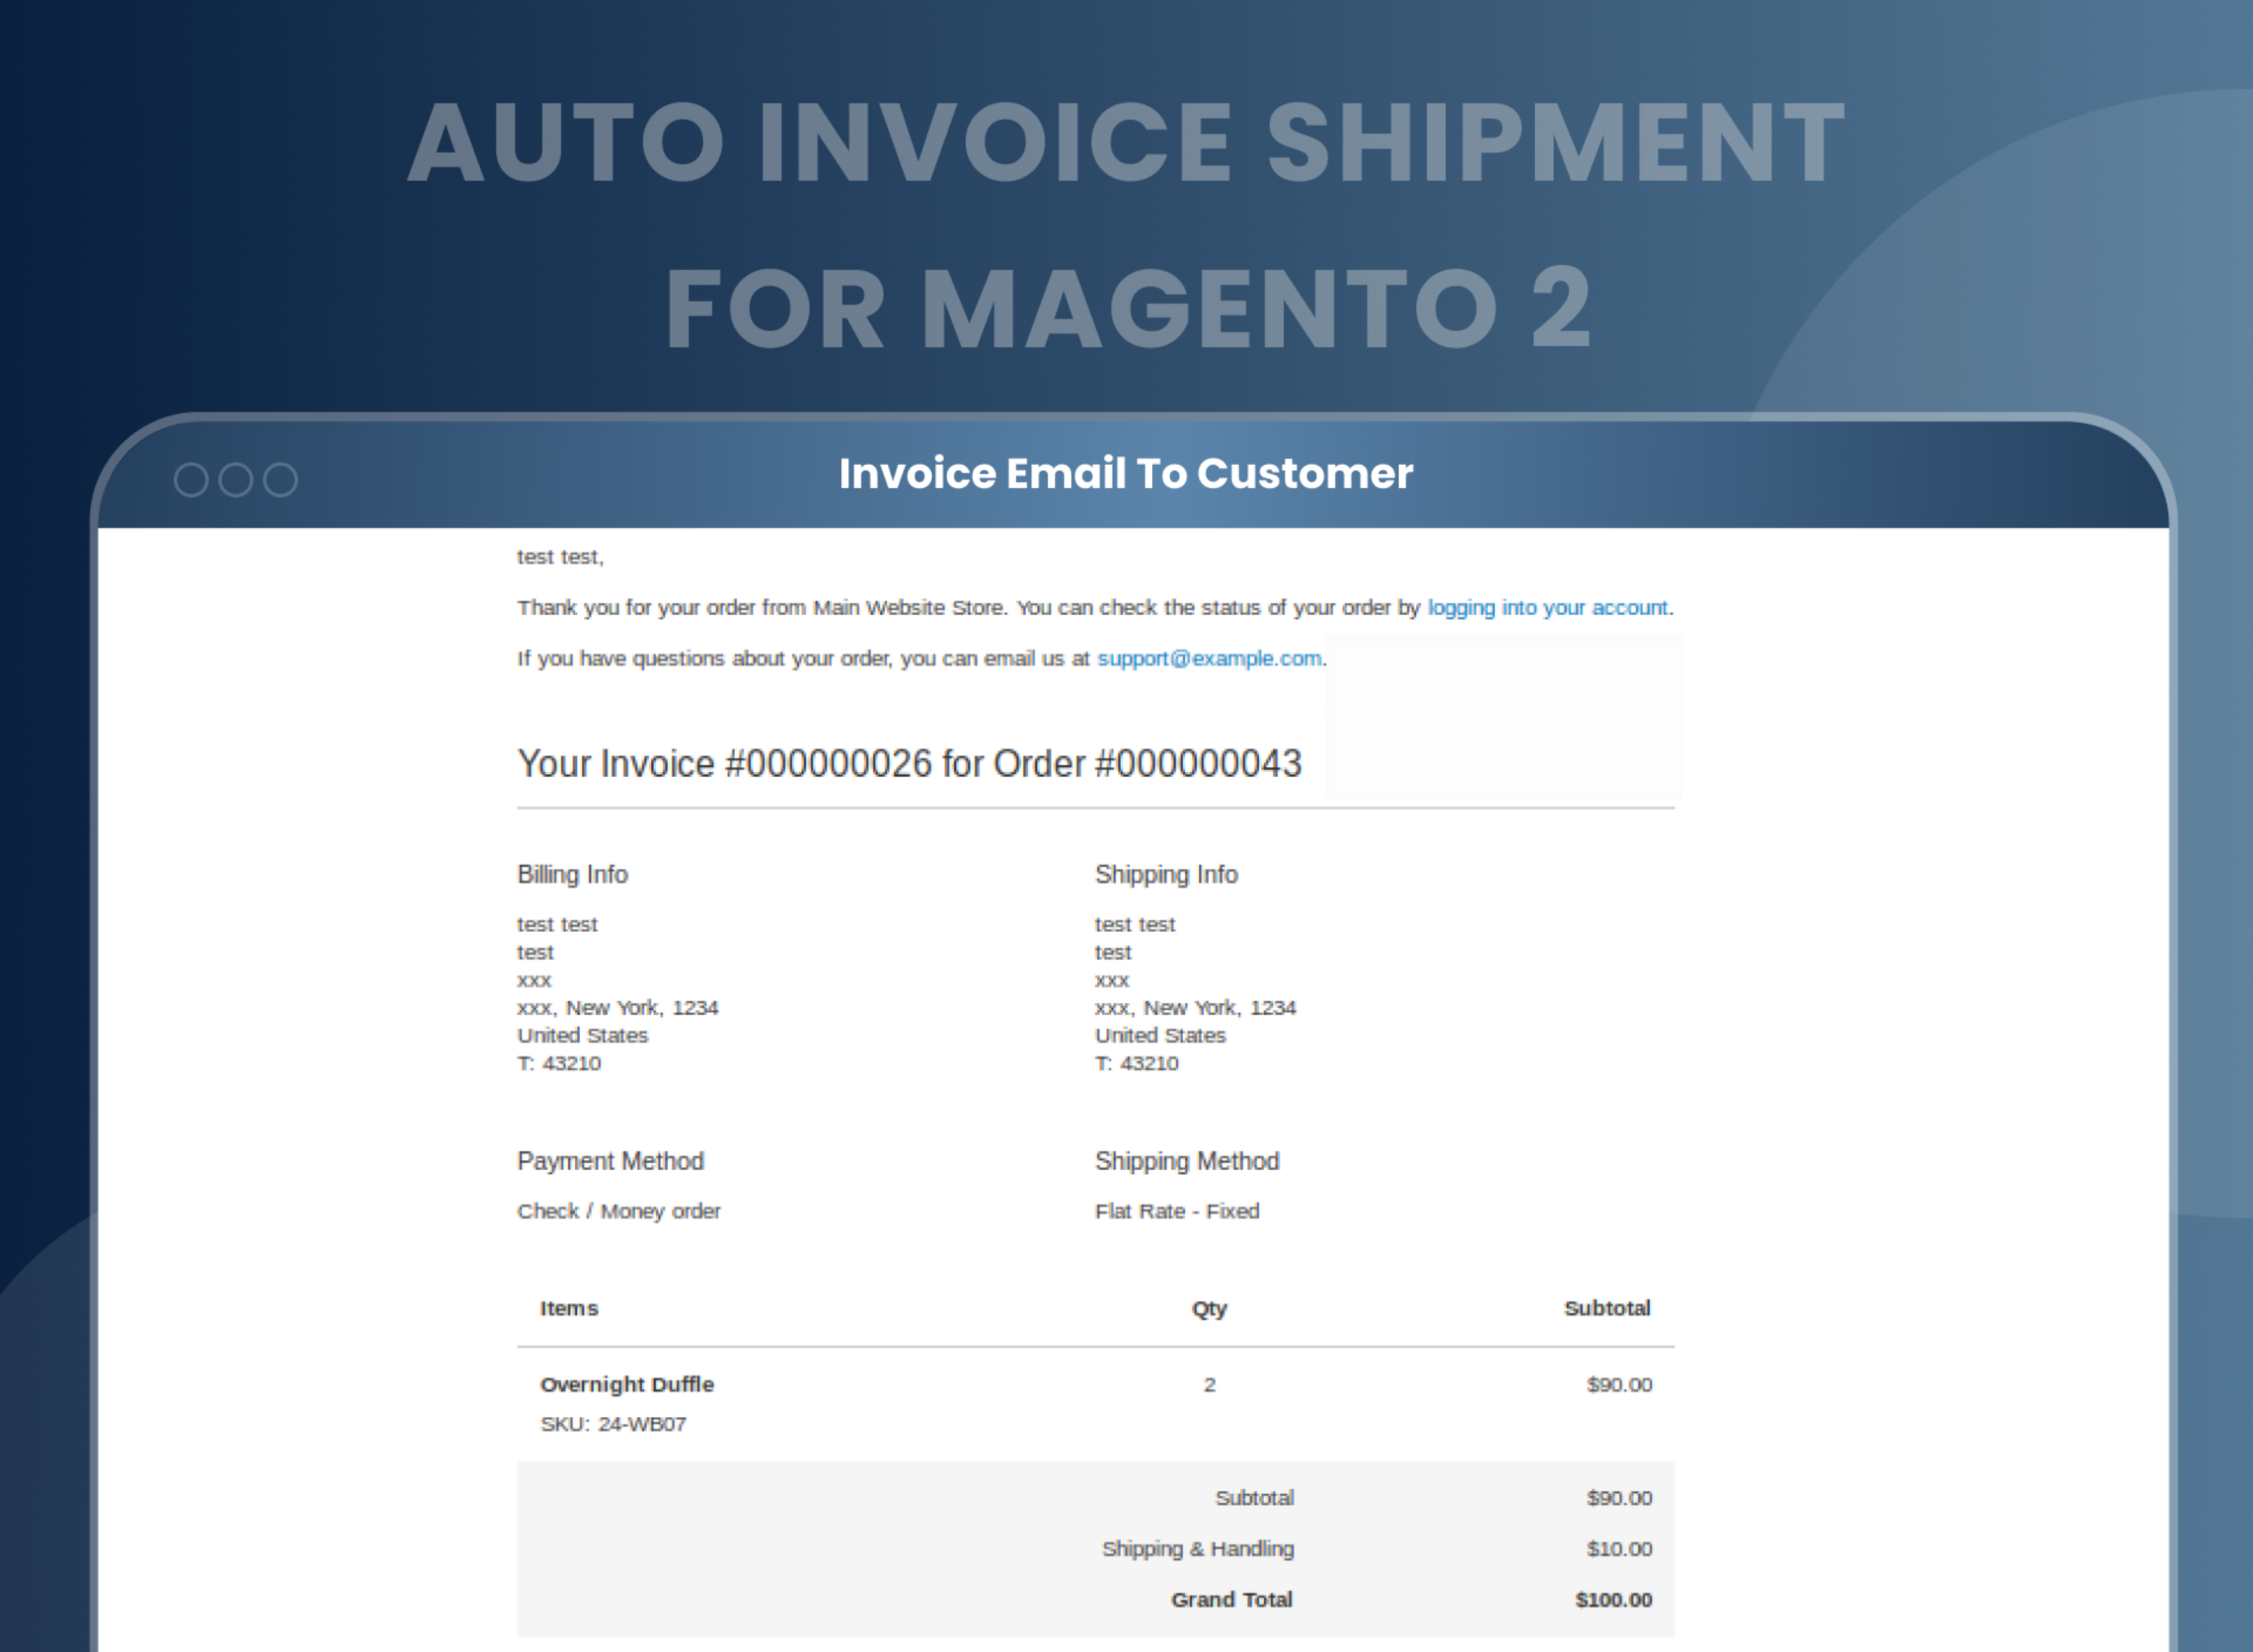 Invoice Email To Customer